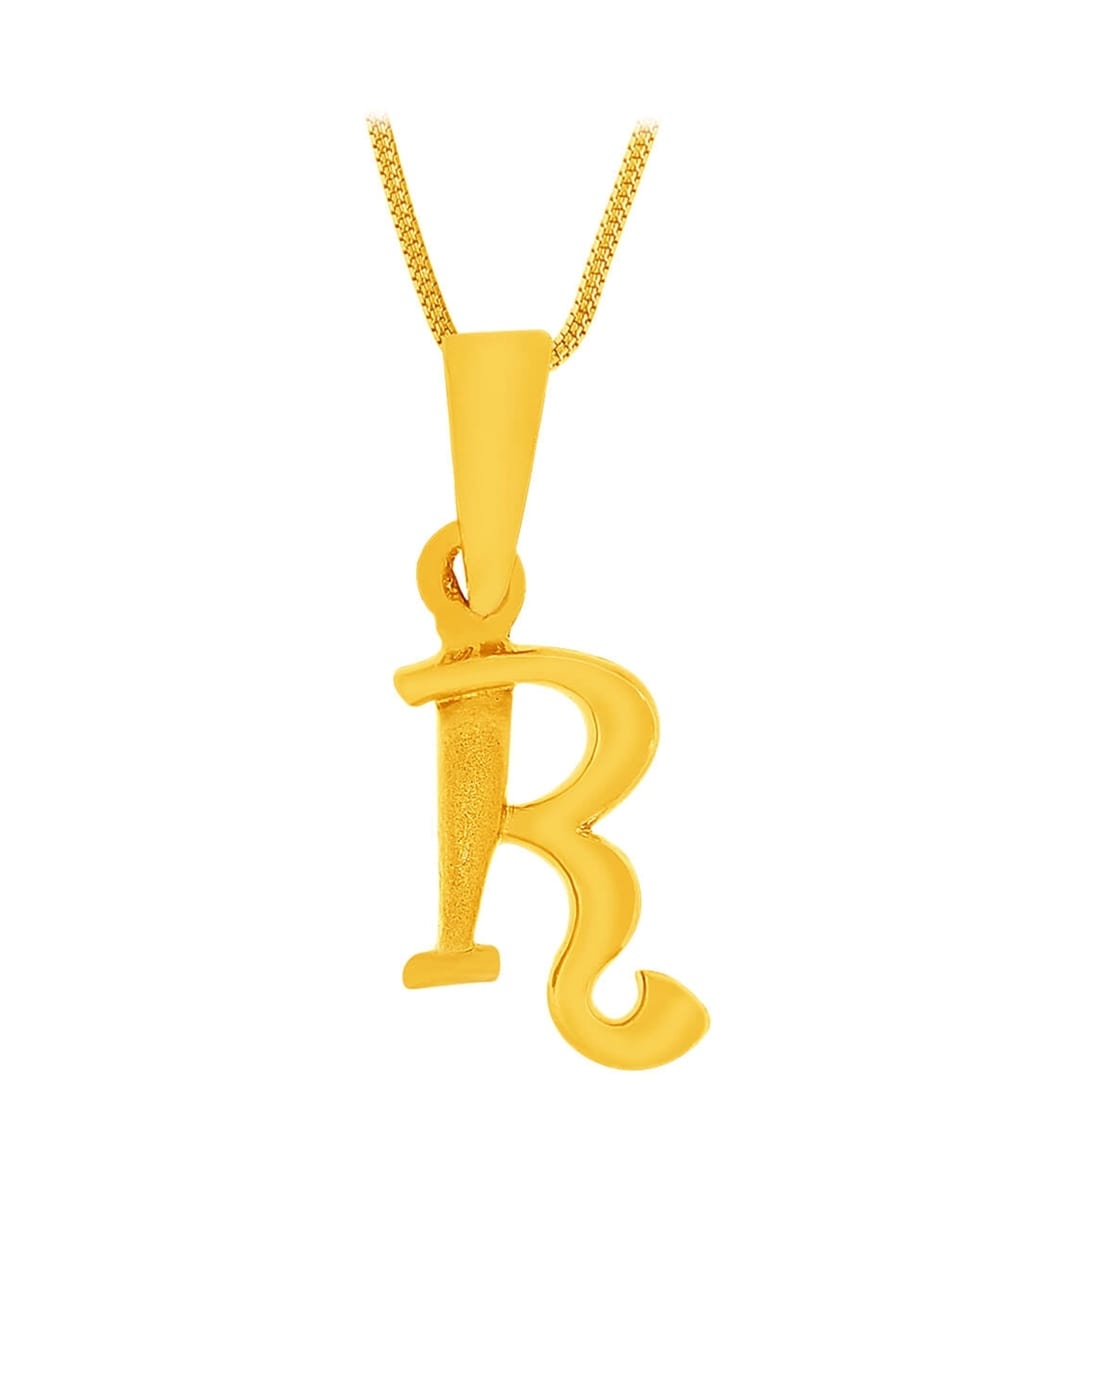 18K Real Gold Plated Gold Chain for Men Dollar Sign Pendant Necklace  Jewelry New | eBay